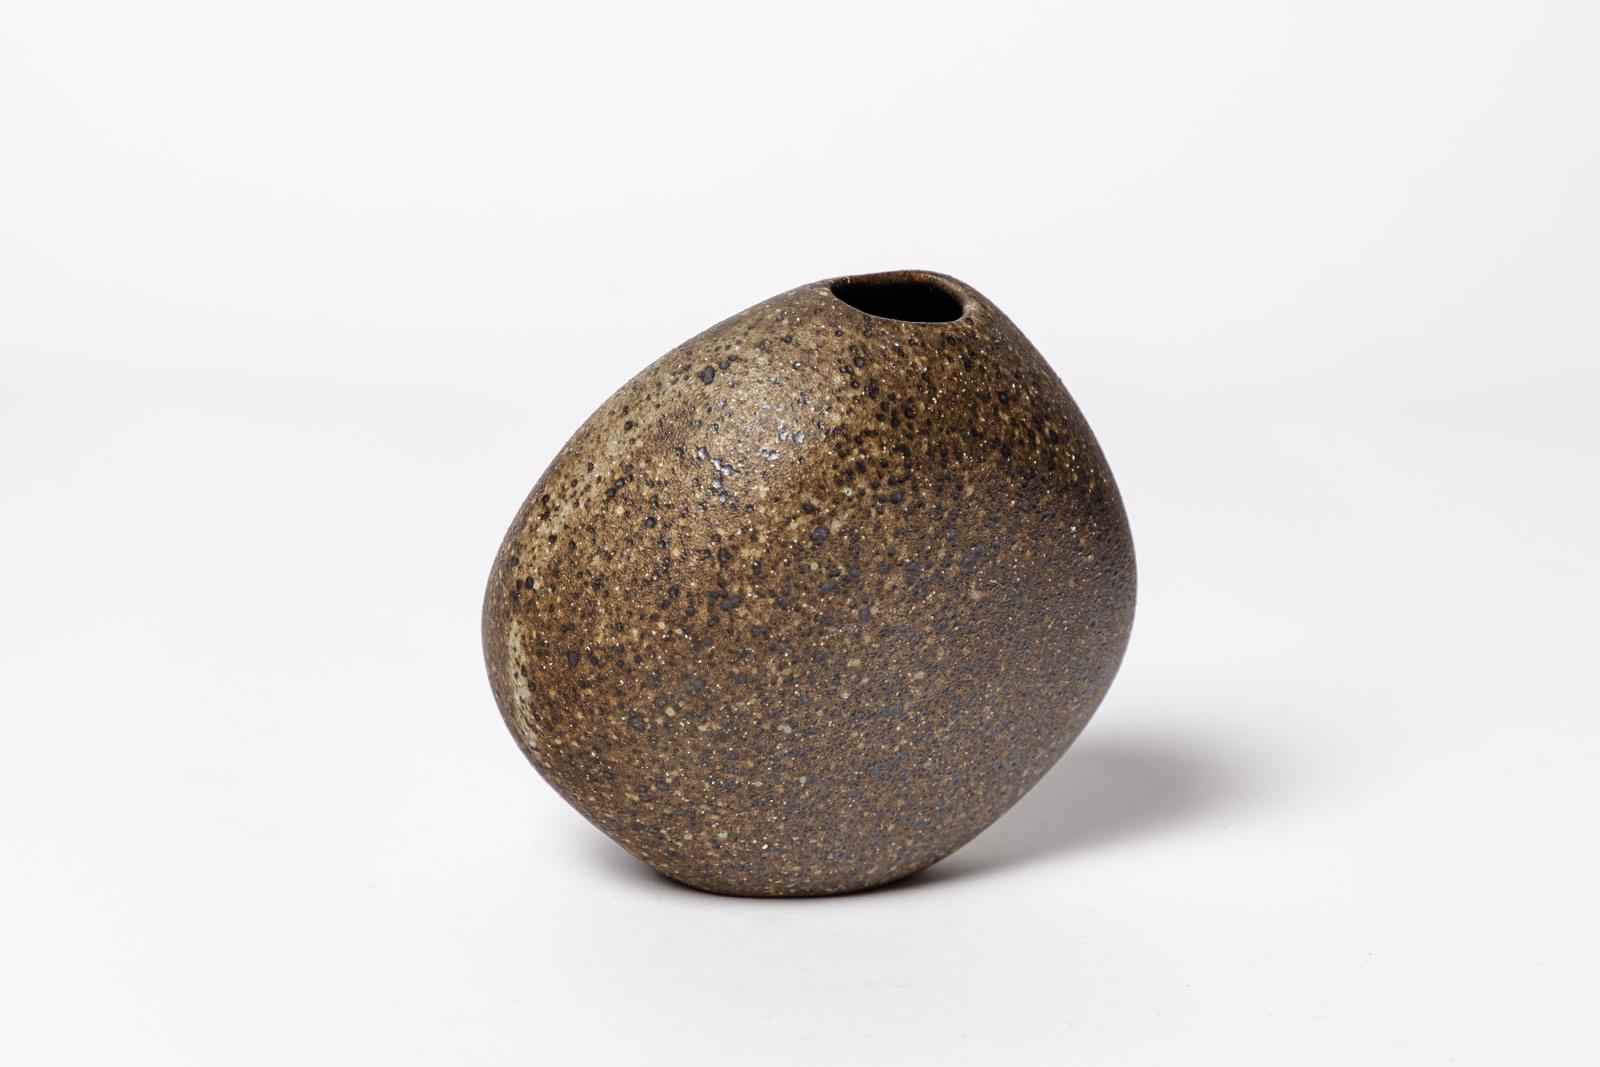 Mid-Century Modern Brown Abstract Ceramic Vase by Tim Orr Free Stone Form, circa 1975 For Sale